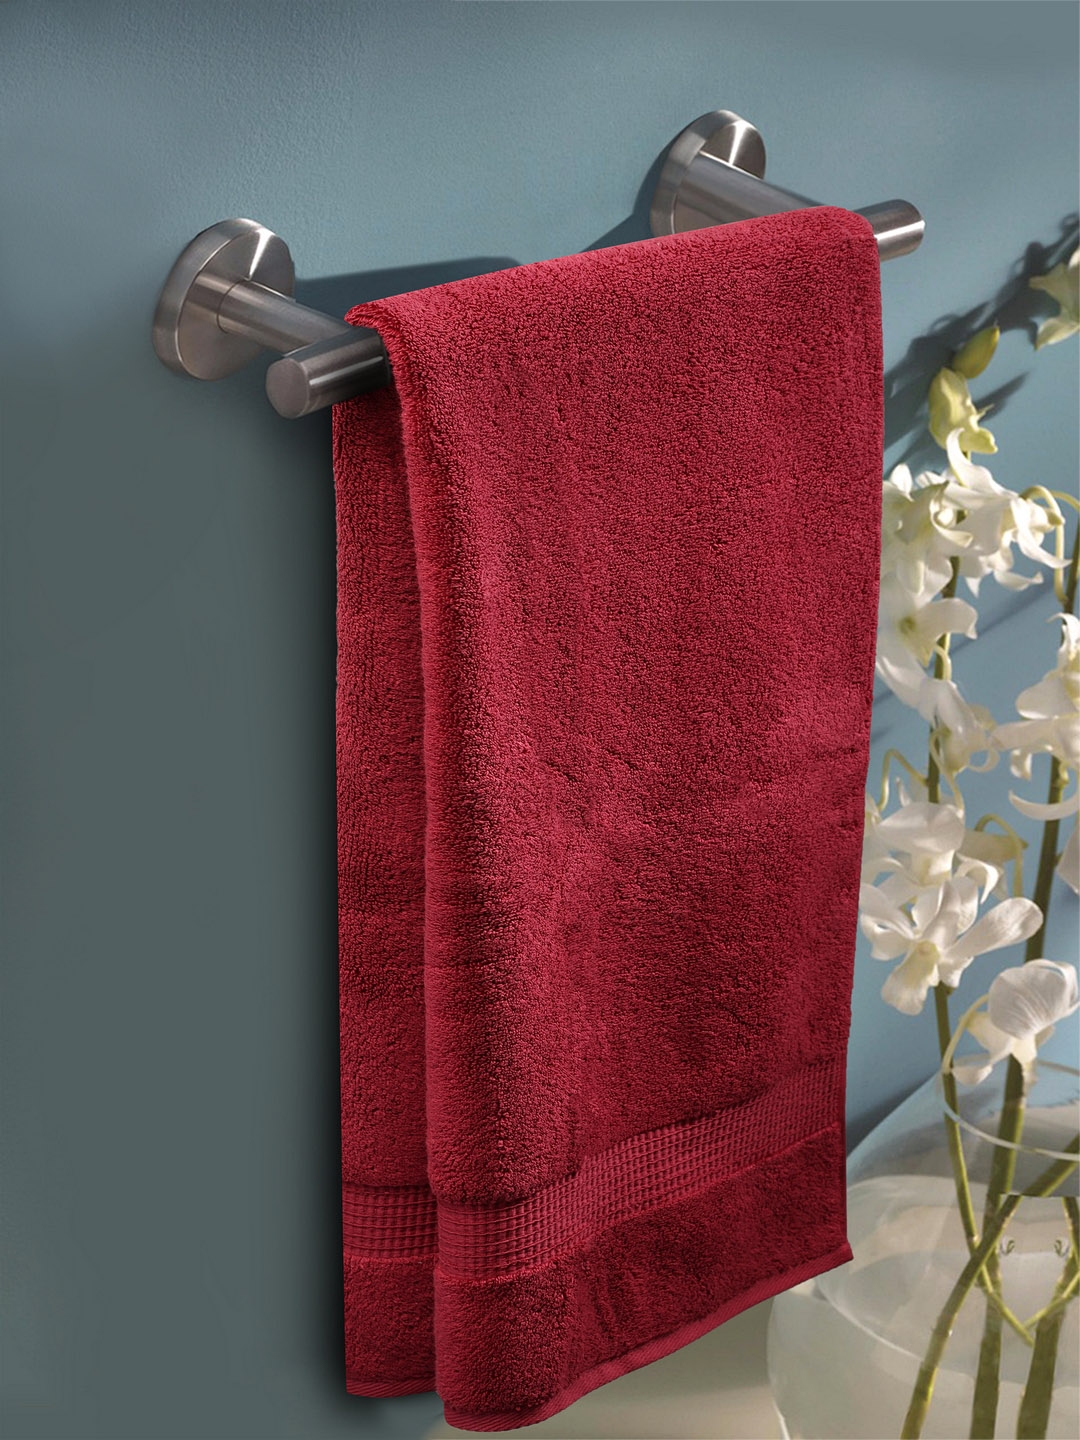 Buy Bombay Dyeing Maroon 600 GSM Cotton Bath Towel - Bath Towels for ...